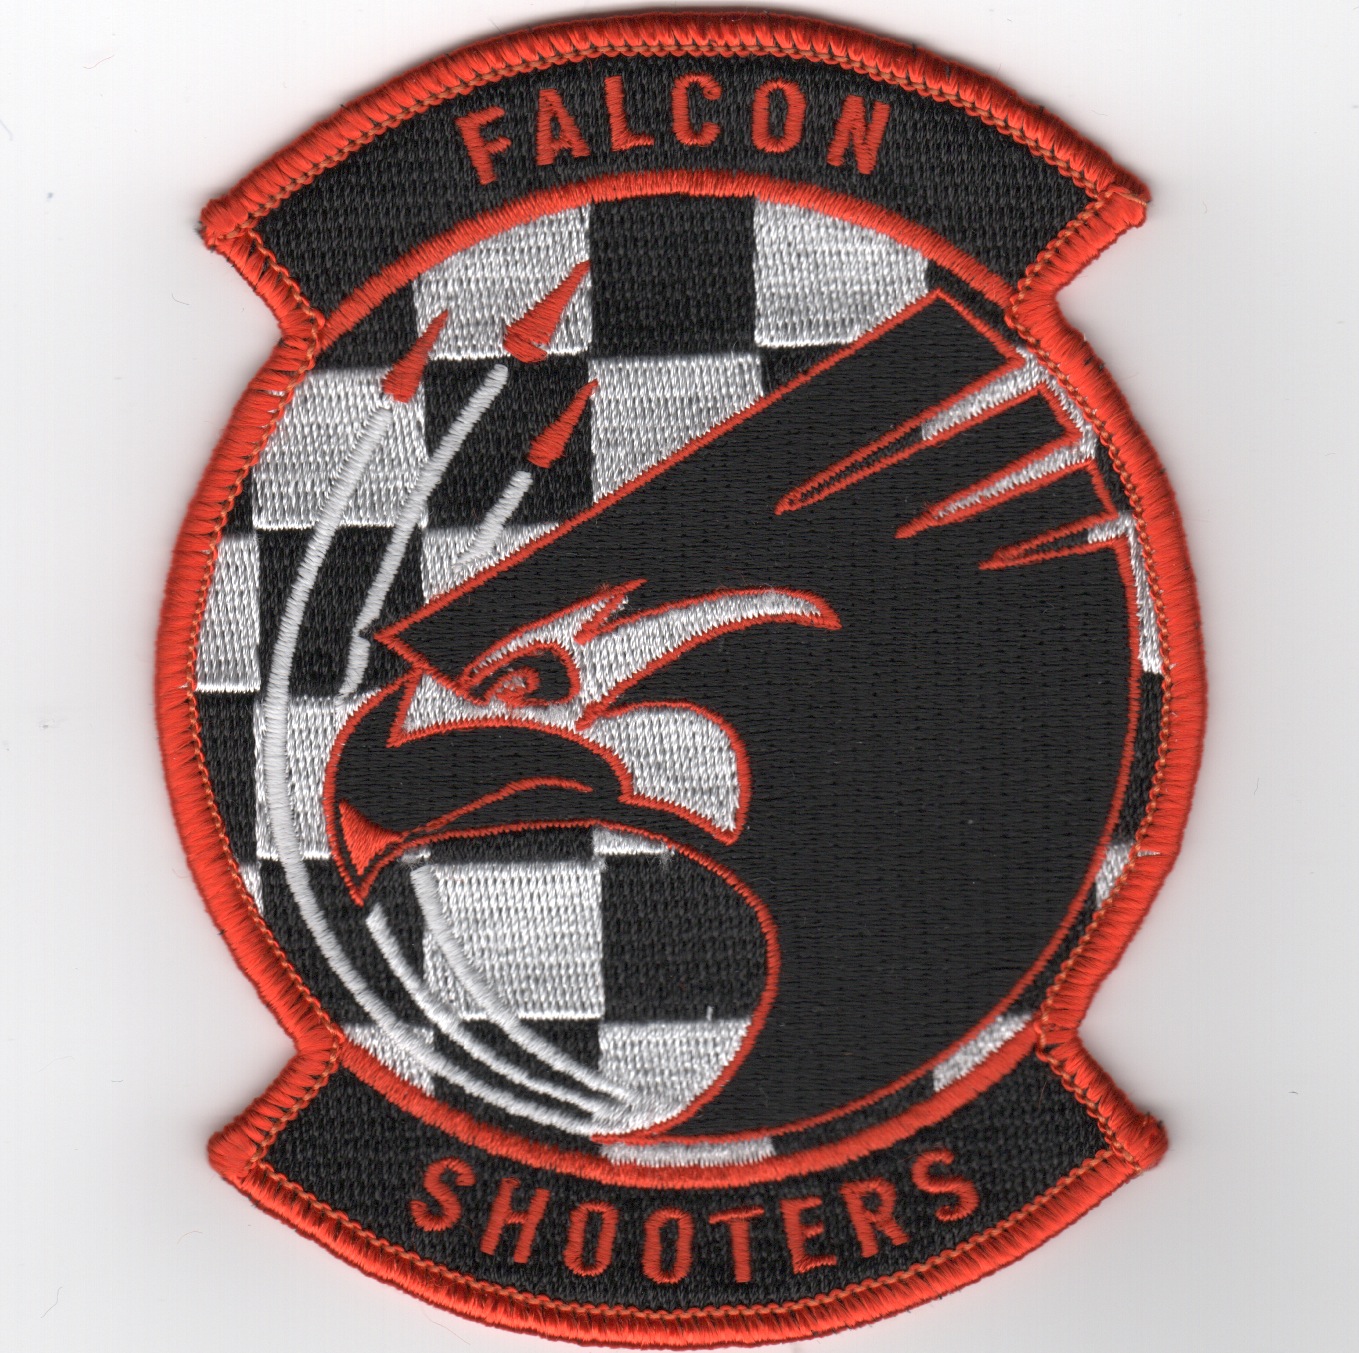 VFA-137 'Falcon Shooters' Patch